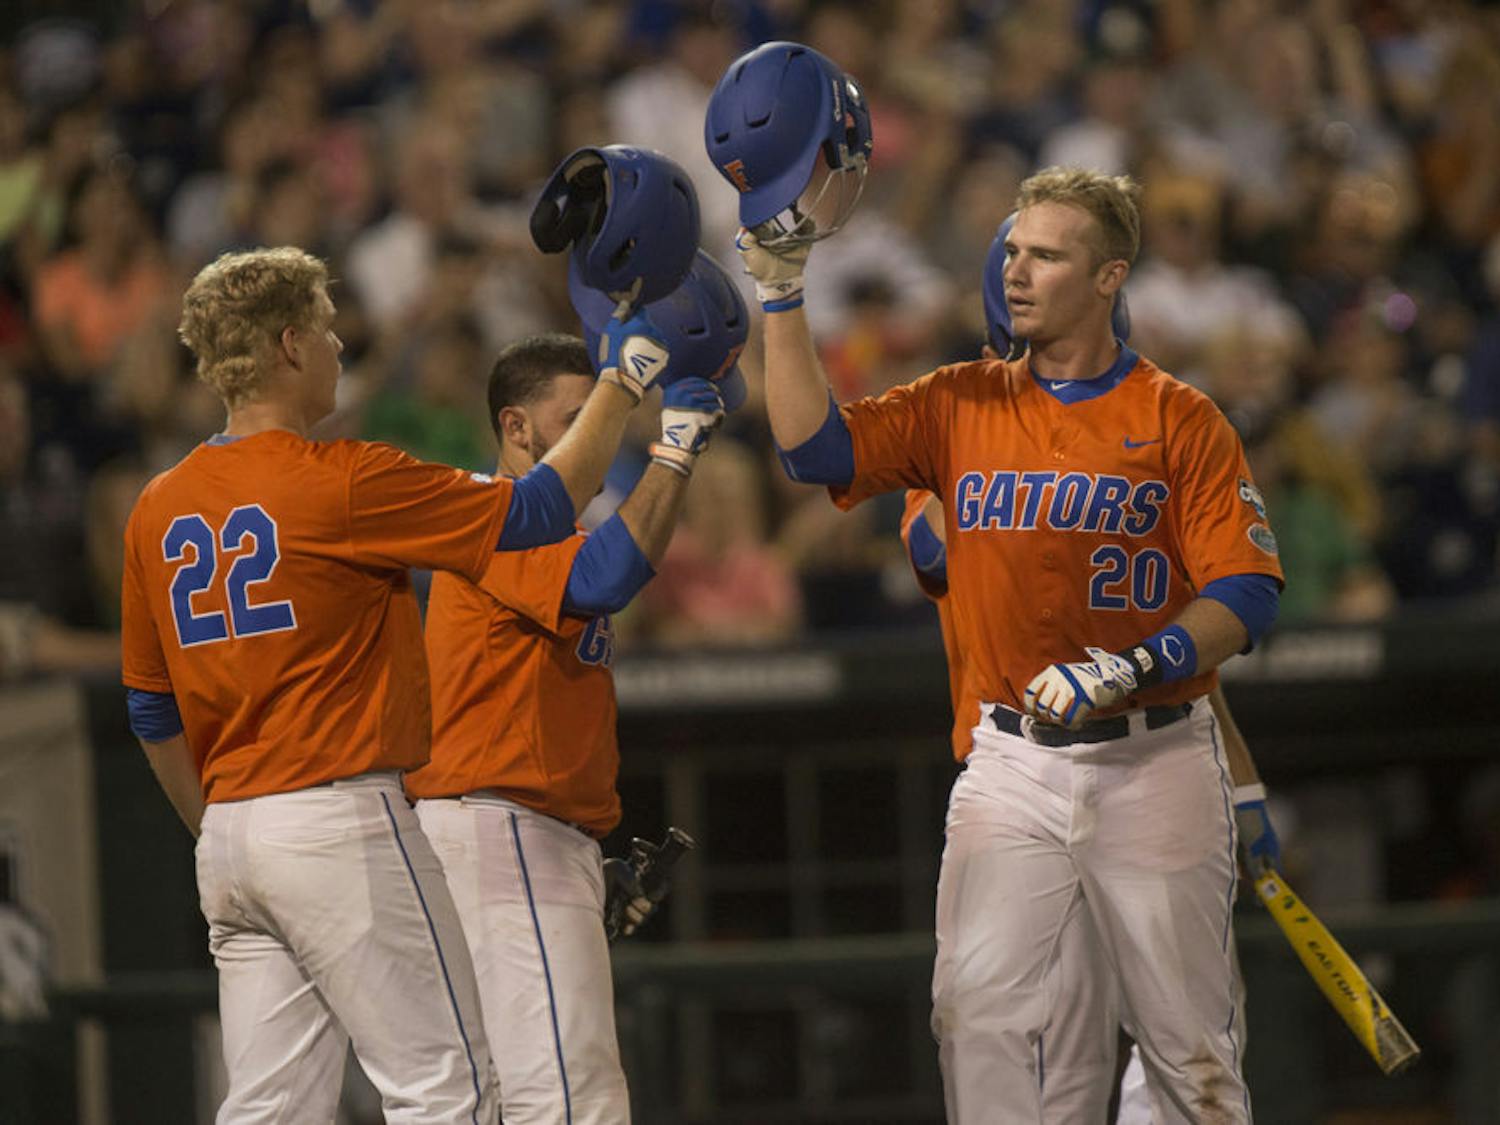 Florida sophomore infielder Peter Alonso (20) reacts after scoring a home run at the top of the seventh inning during the Gators' 10-2 victory against Miami in the NCAA Men's College World Series on Wednesday, June 17, 2015 the TD Ameritrade Park in Omaha.